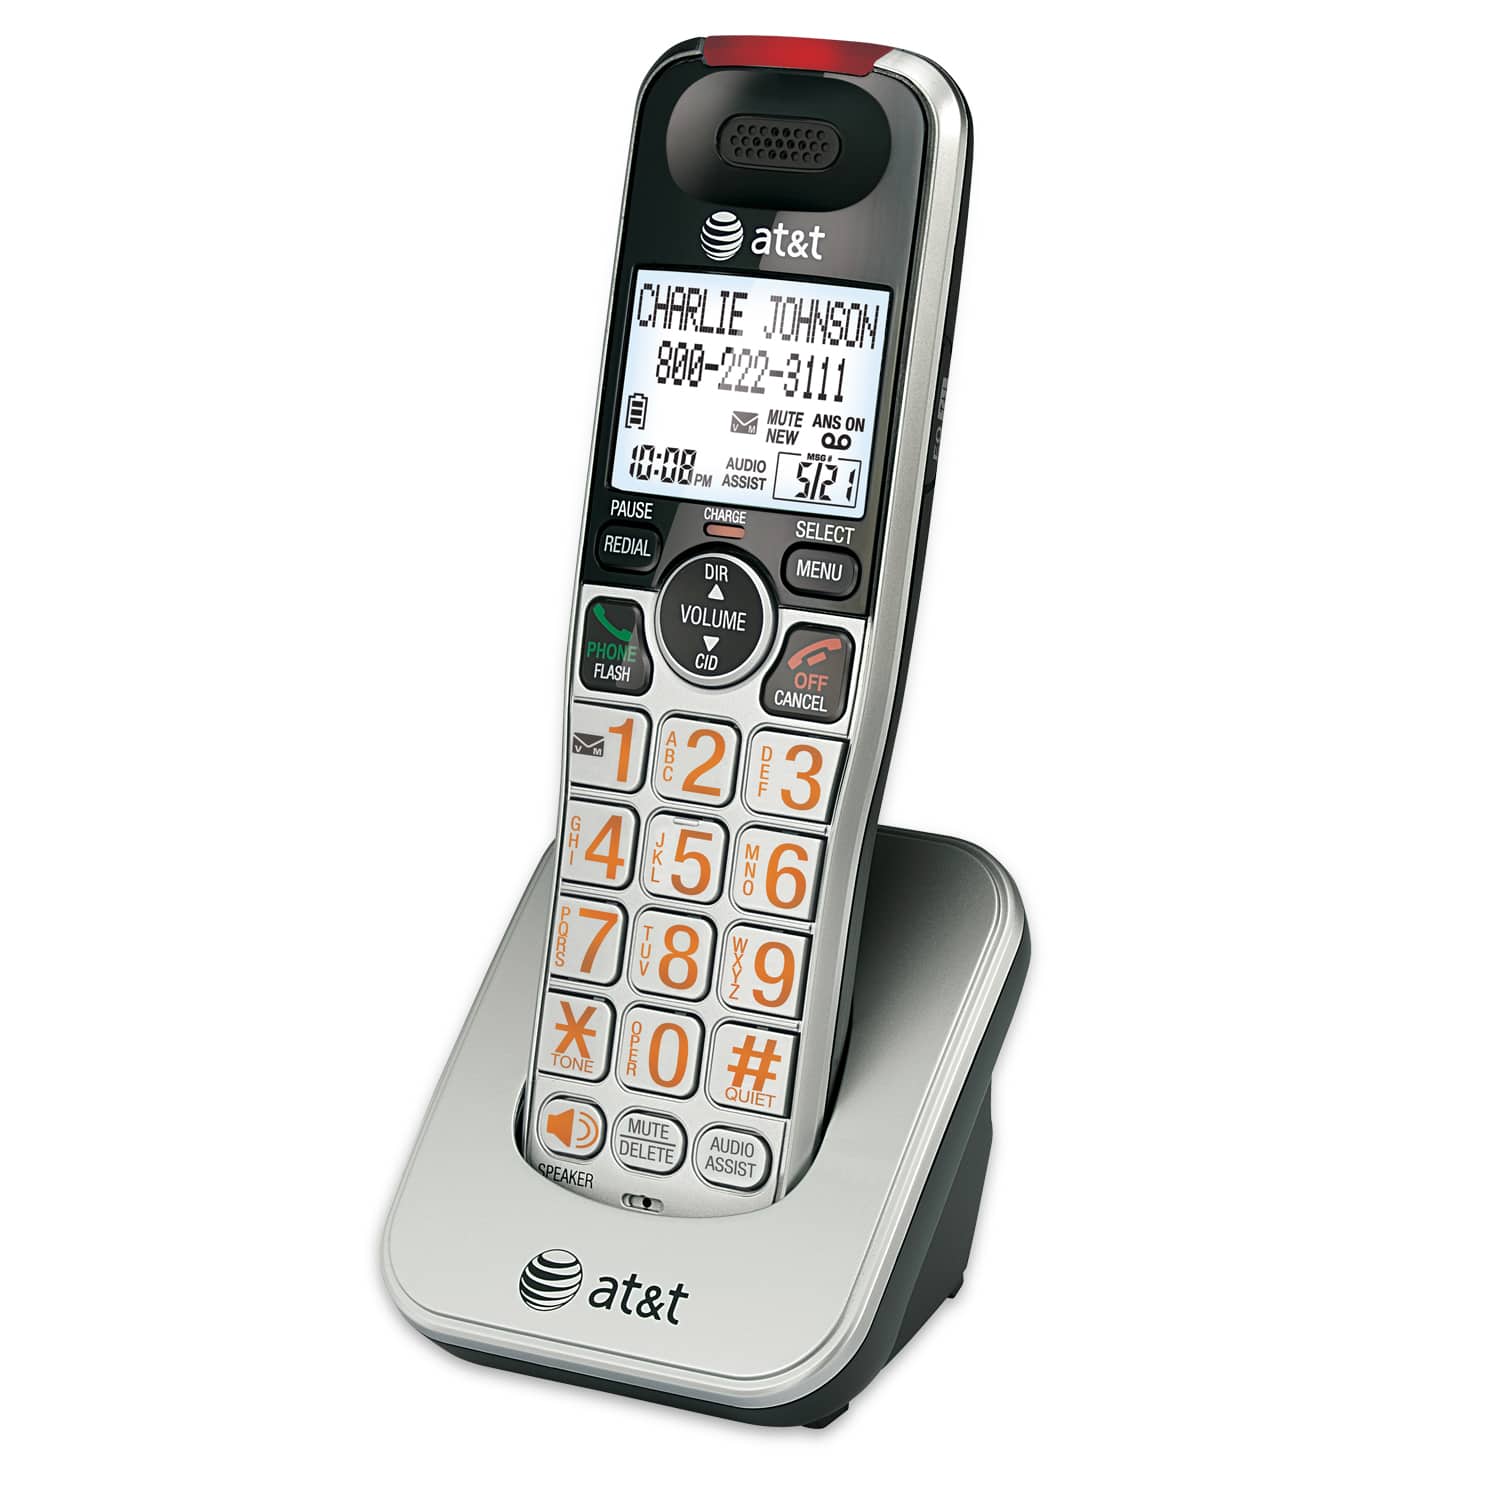 2 handset phone system with caller ID/call waiting - view 2